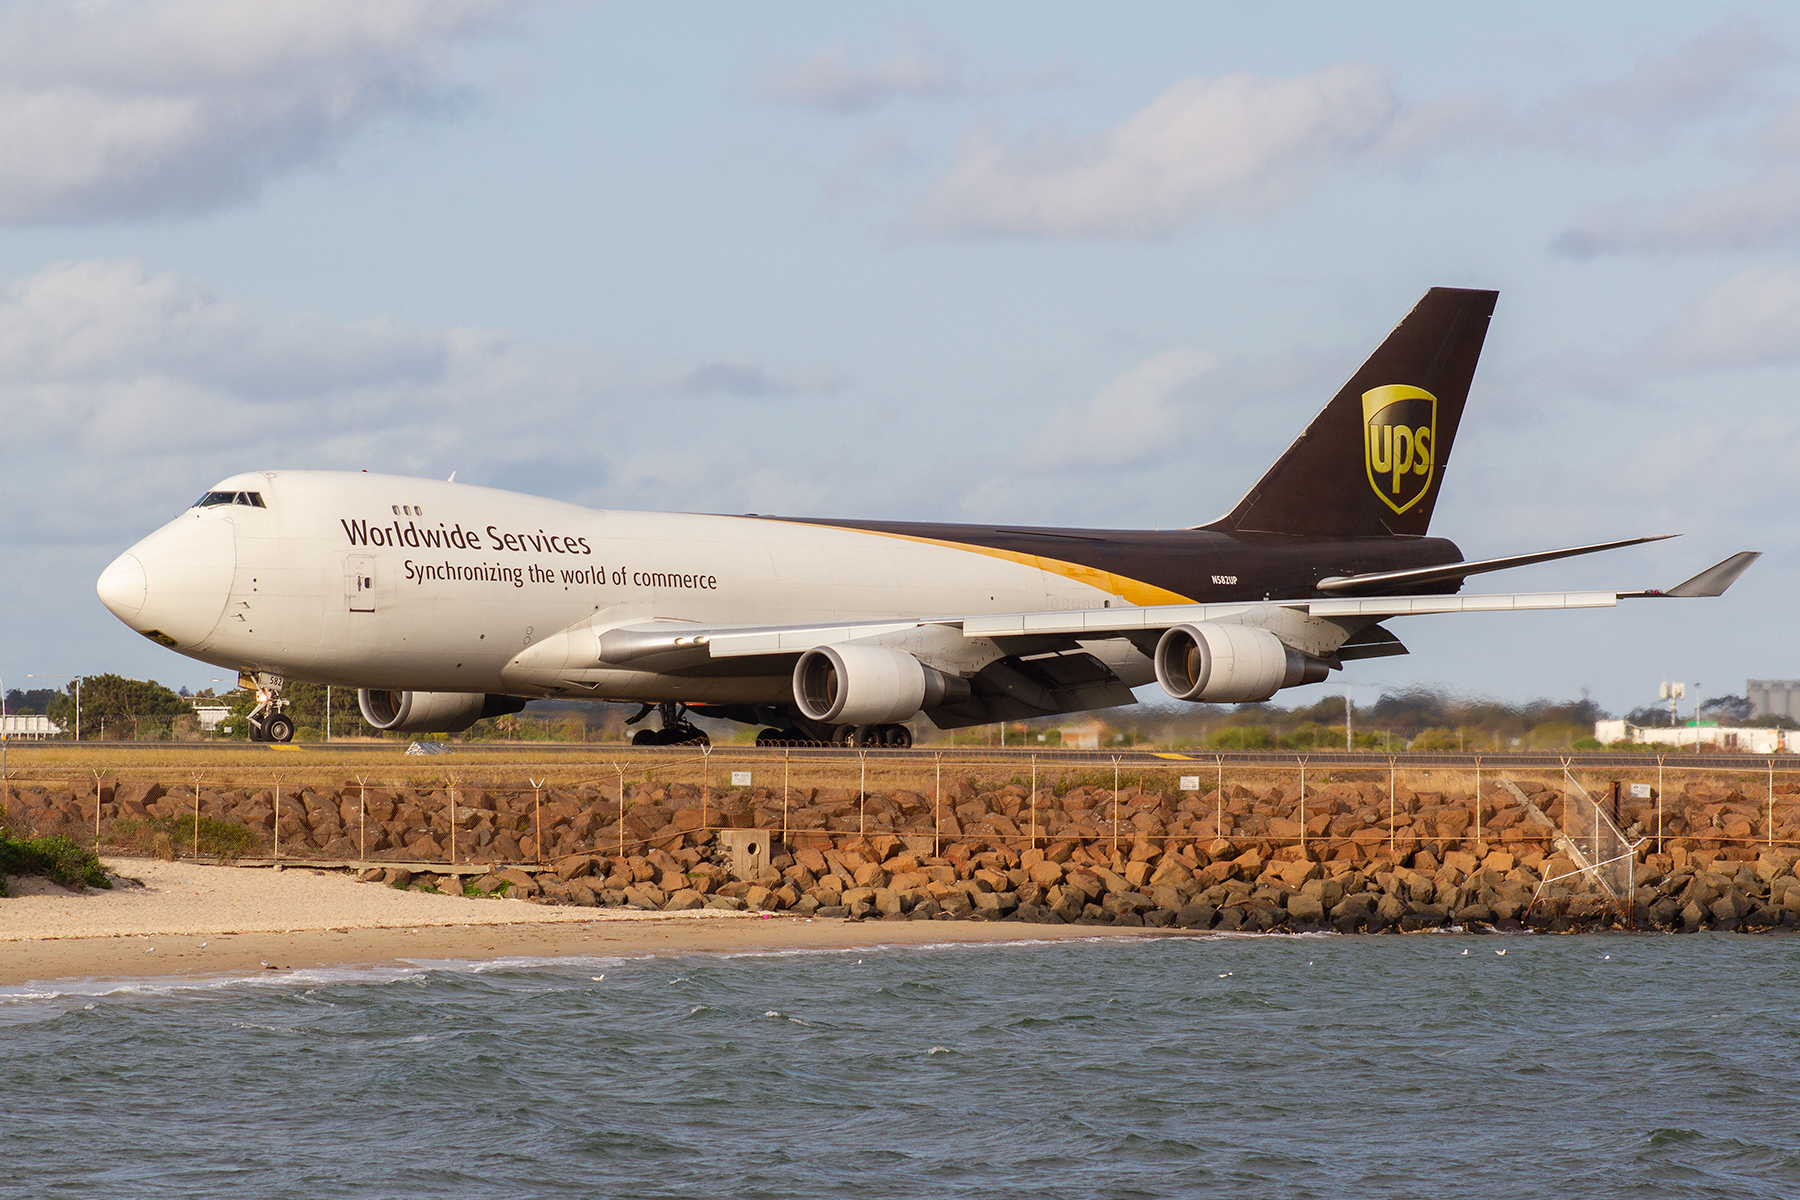 UPS Boeing 747-400F N582UP at Kingsford Smith